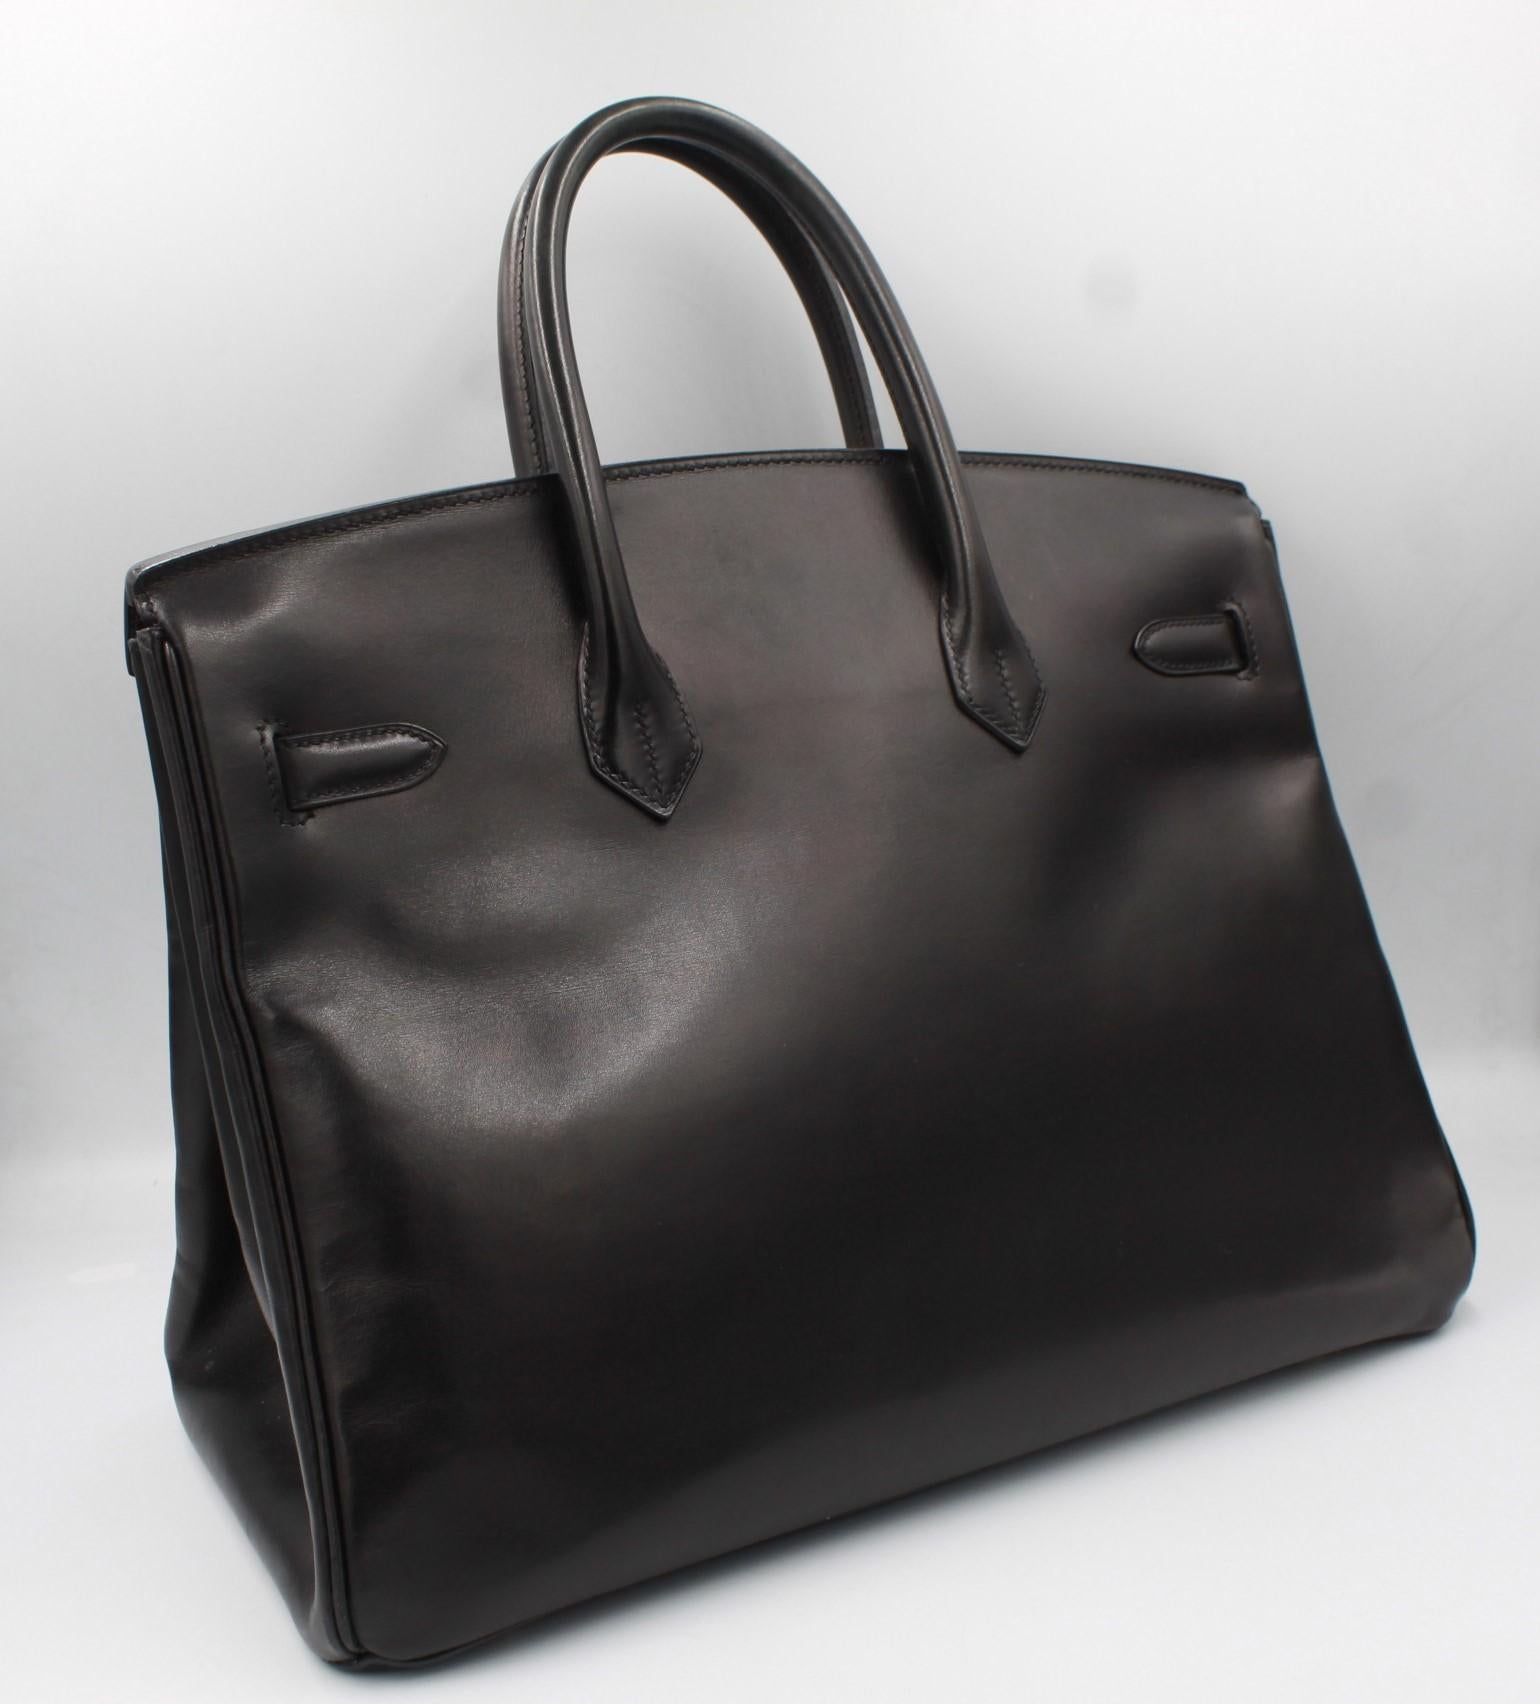 Hermès Birkin 35 handbag in black box leather.
Gold finishes.
good condition, with some lights signs of wear.
sold with its padlock and keys.
35cm x 29cm x 18cm